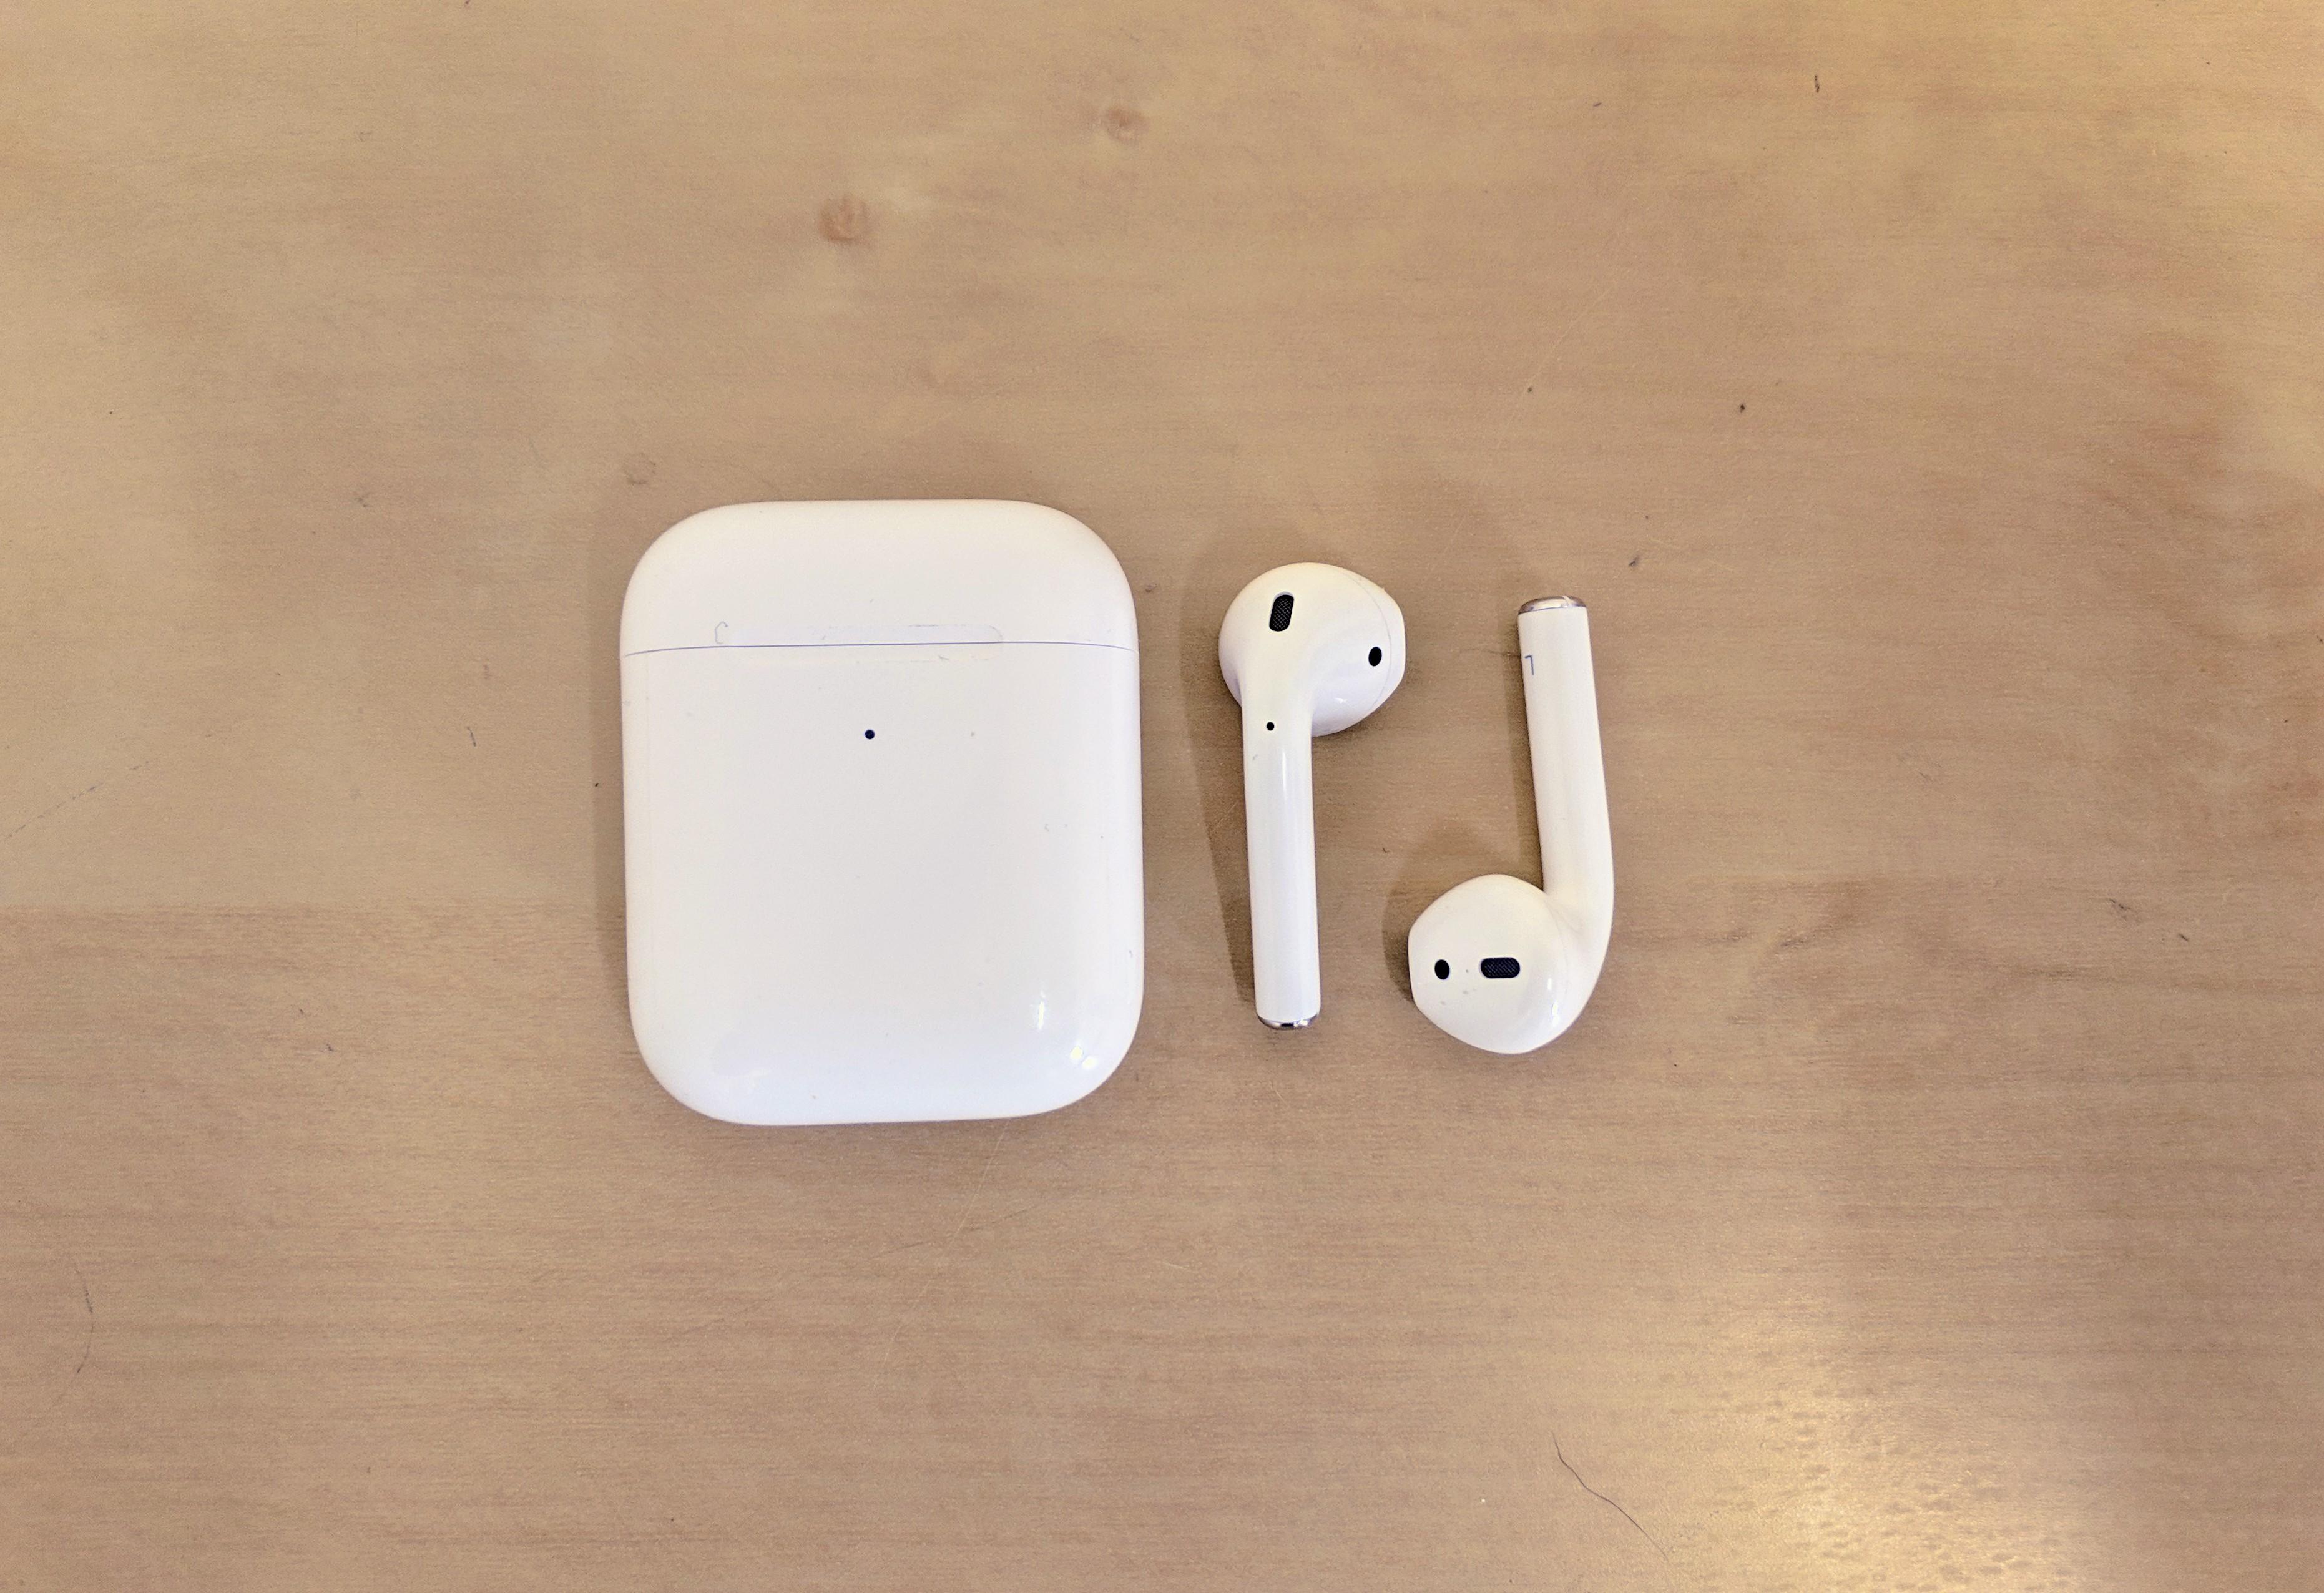 airpods-2019-out-of-case.jpg